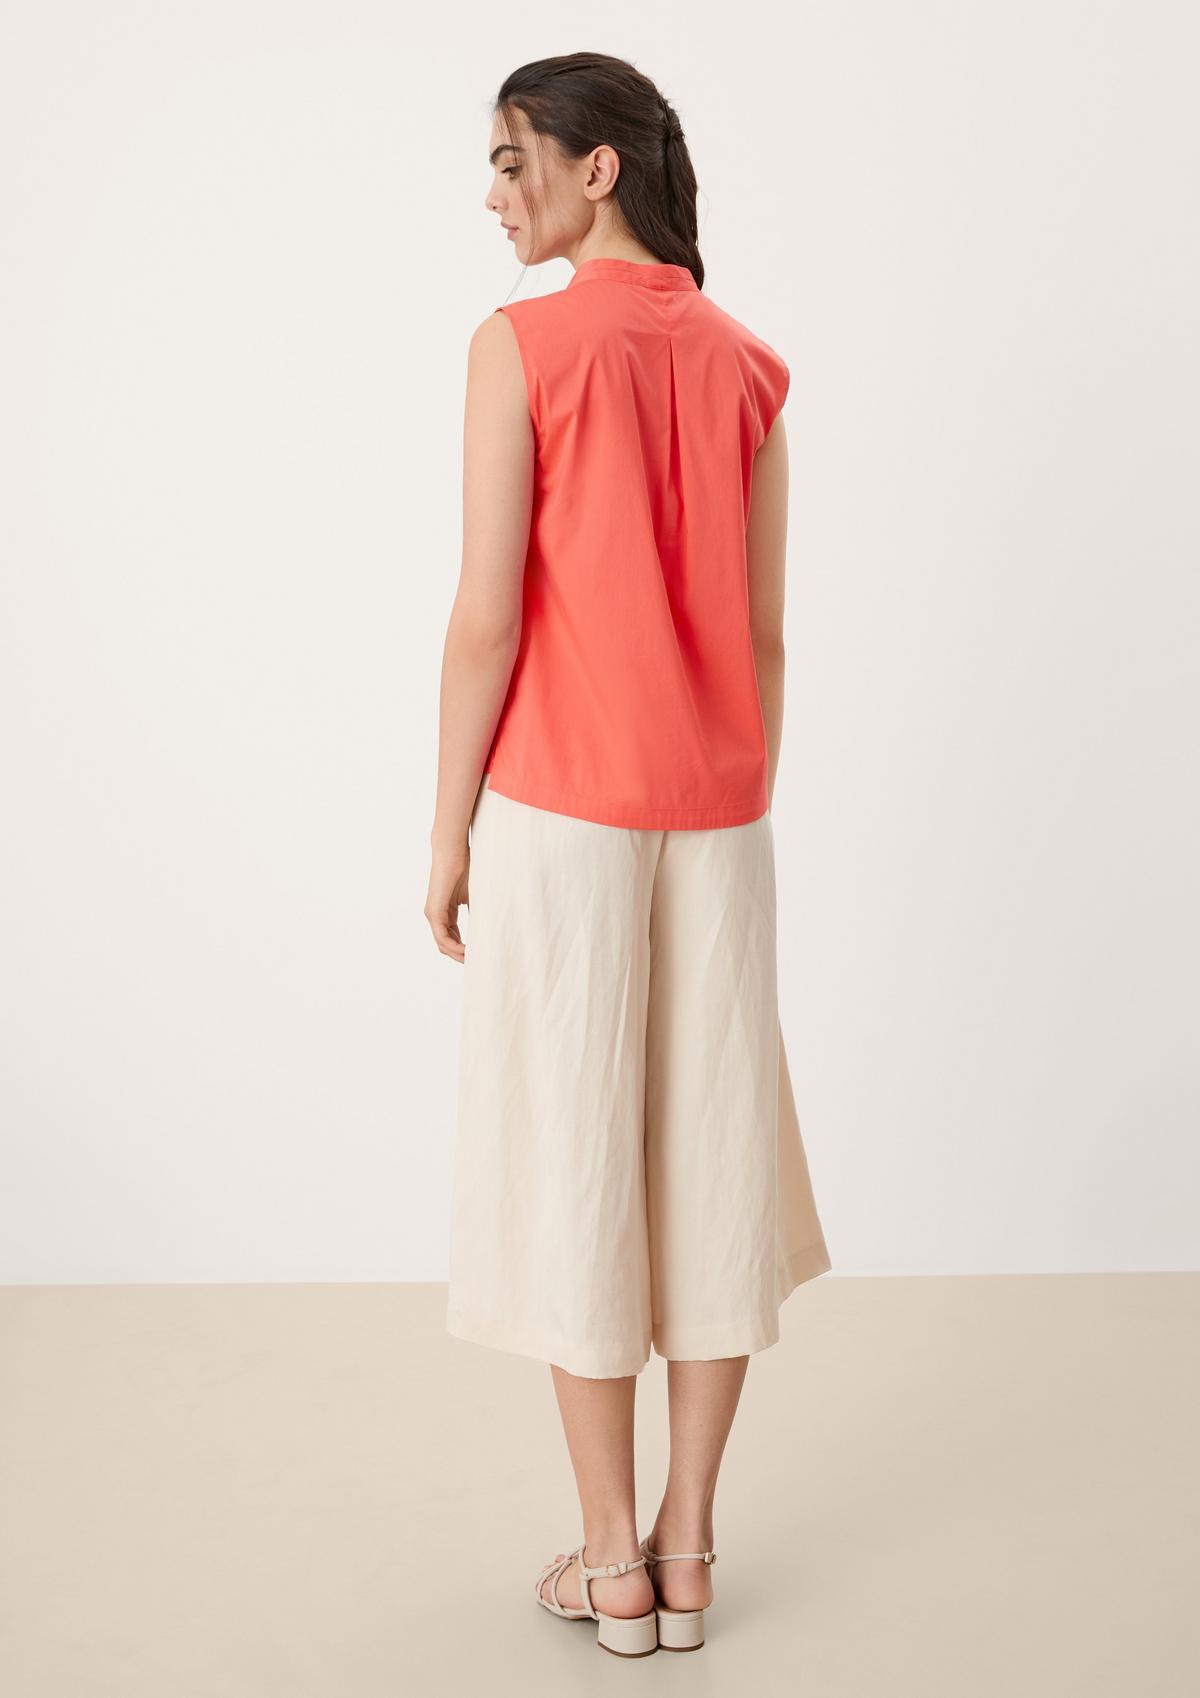 s.Oliver Top with a beautifully shaped V-neckline